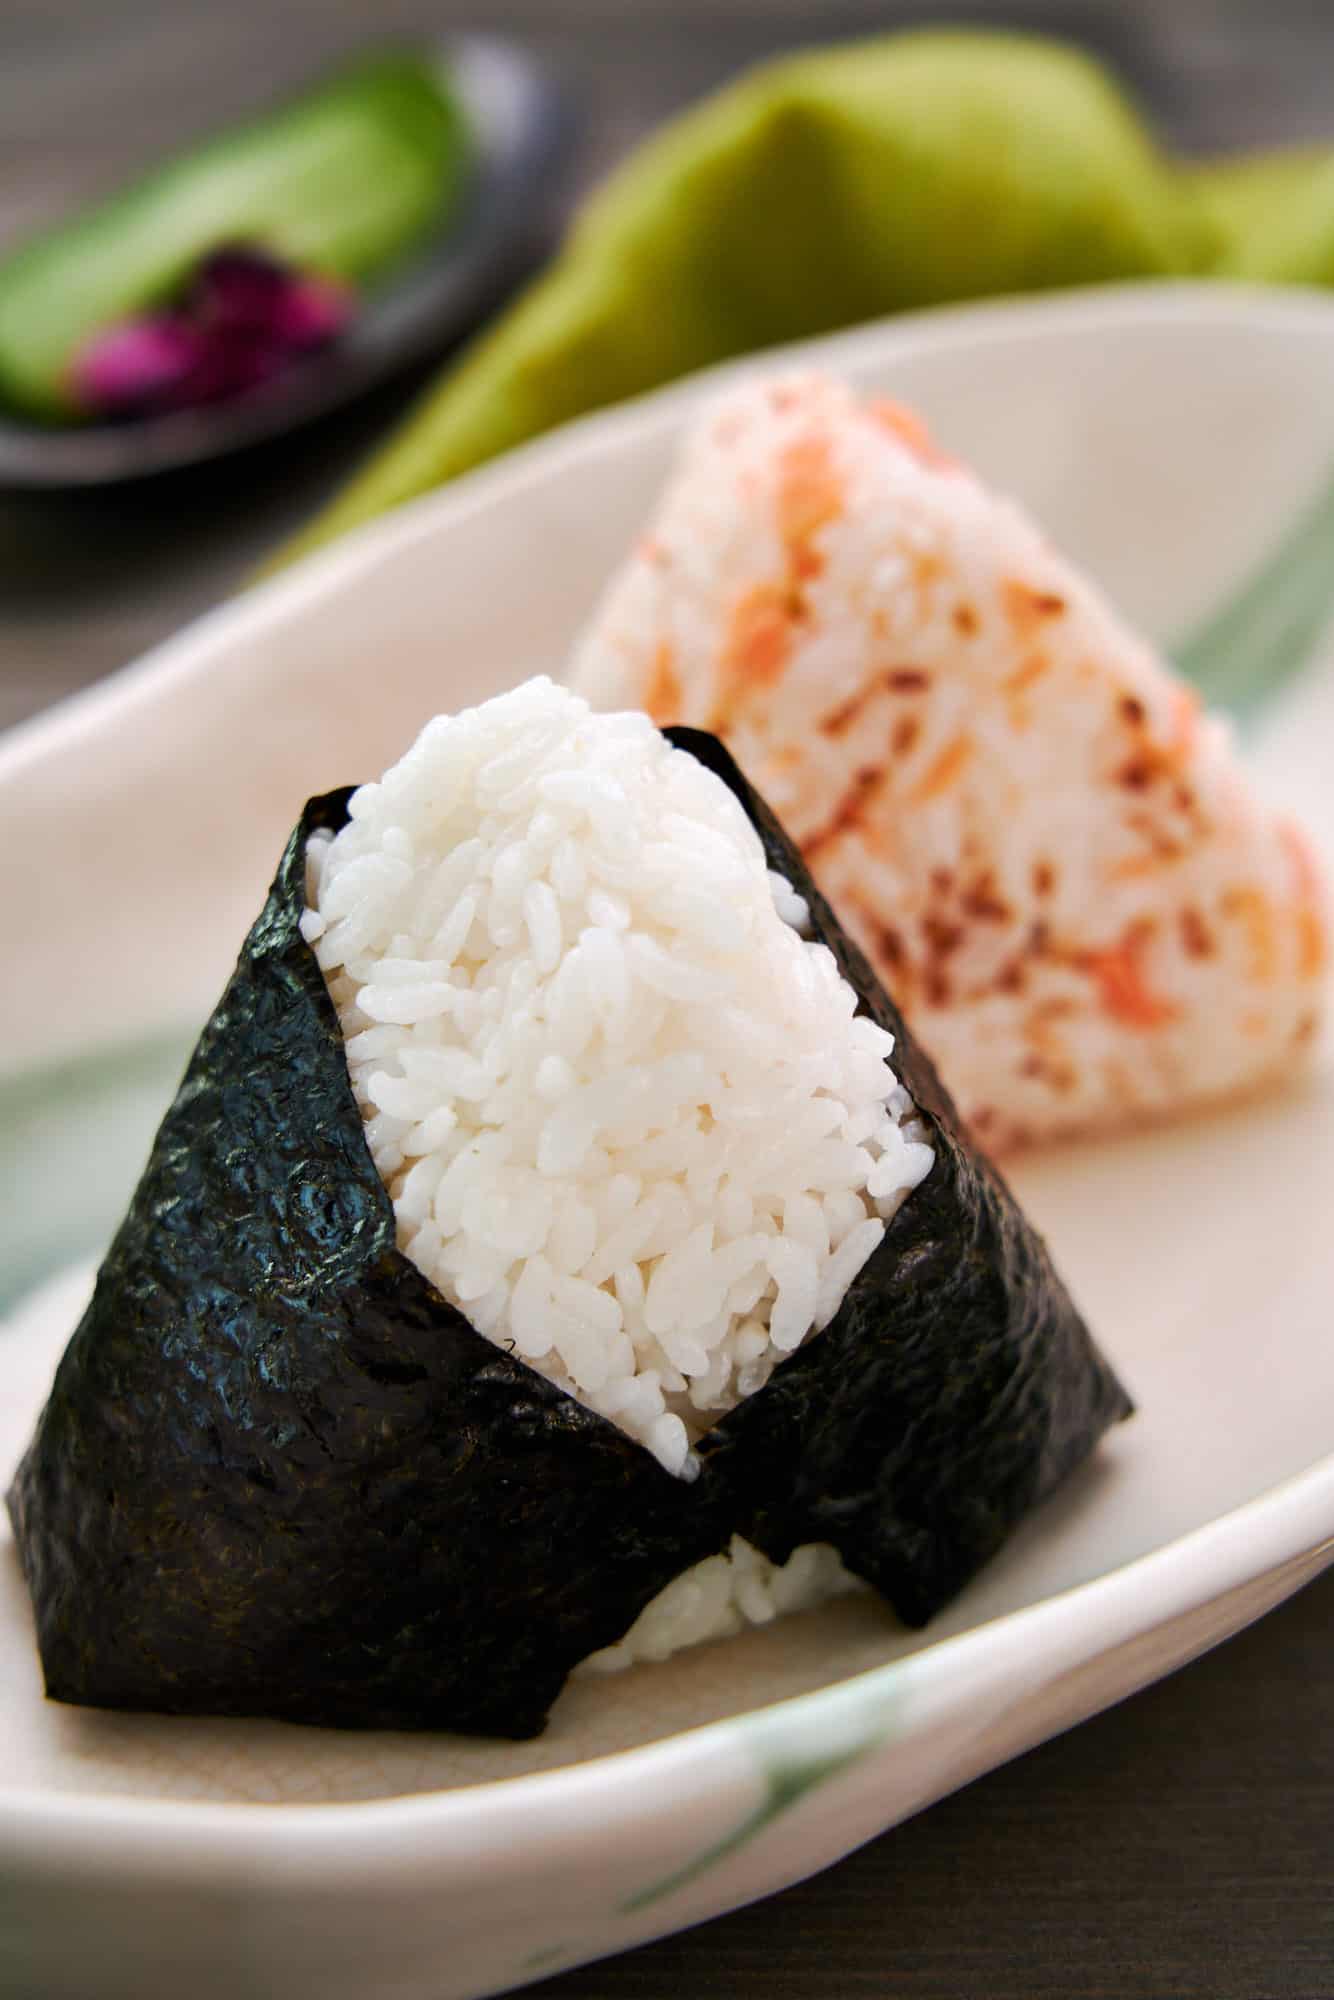 Two ways to make salmon onigiri. A traditional salted salmon flake onigiri wrapped in nori in the foreground and a rice ball mixed with salmon flakes and toasted sesame in the background.